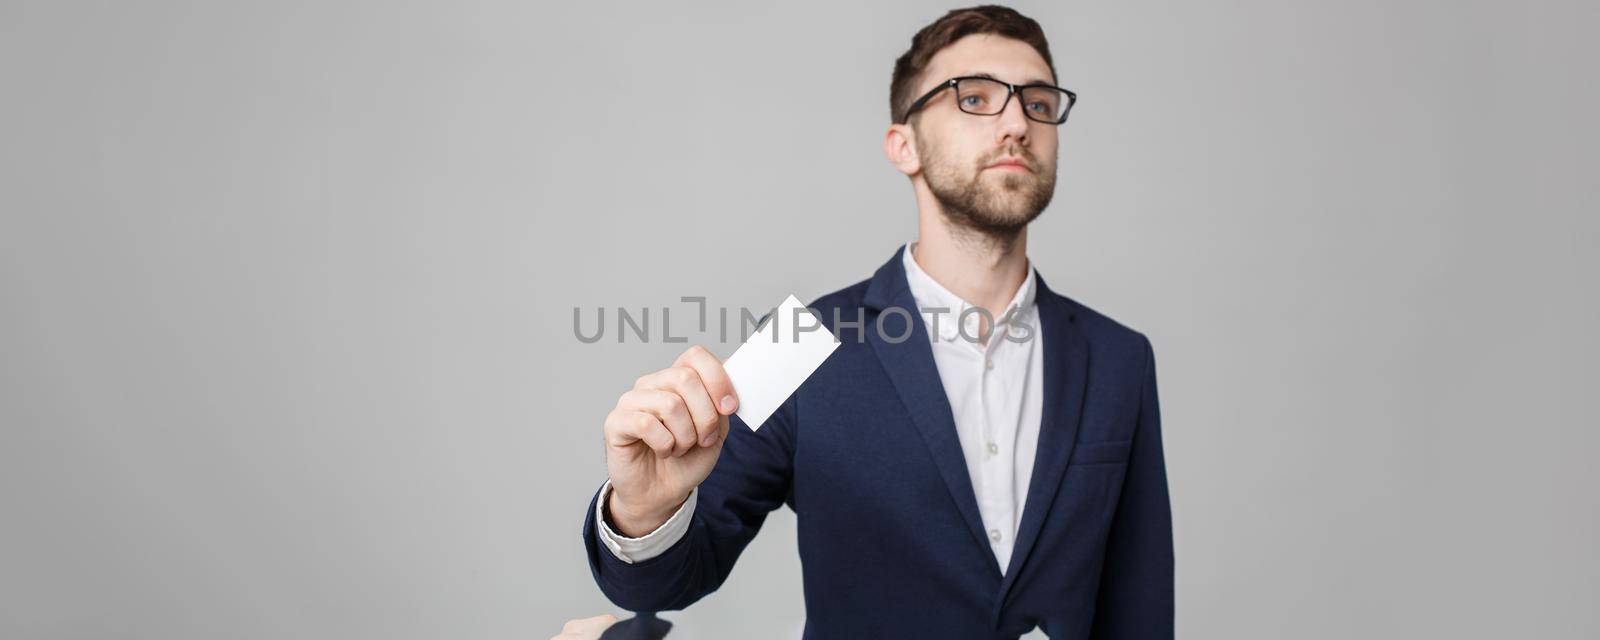 Business Concept - Portrait Handsome Business man showing name card with smiling confident face. White Background.Copy Space.